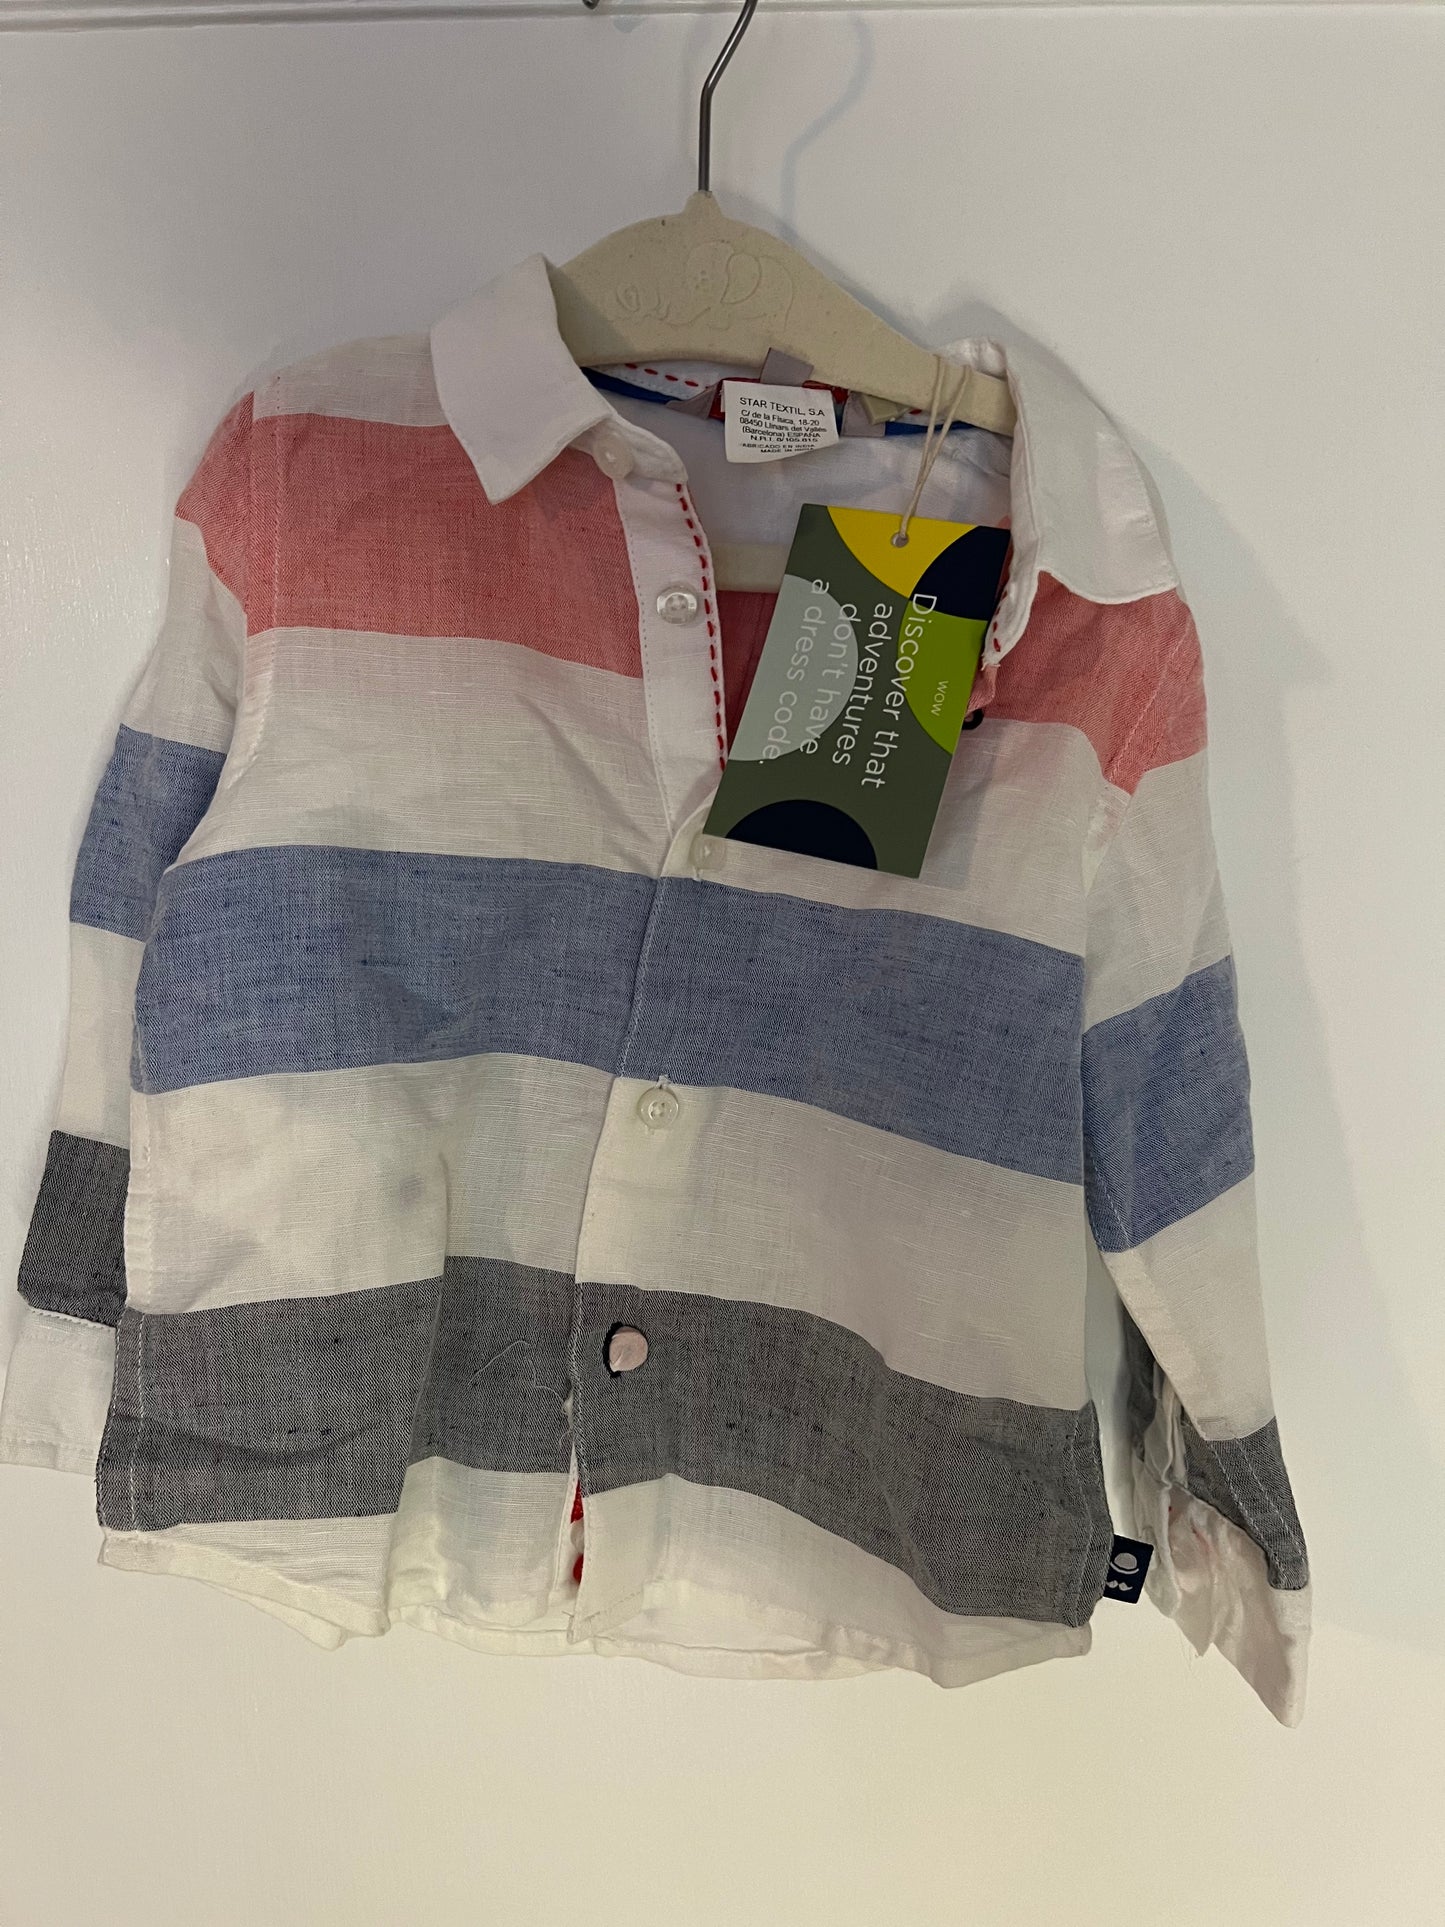 New with Tags Boys Boboli Button Down Striped Shirt Size 18m PPU 45208 or Spring Sale